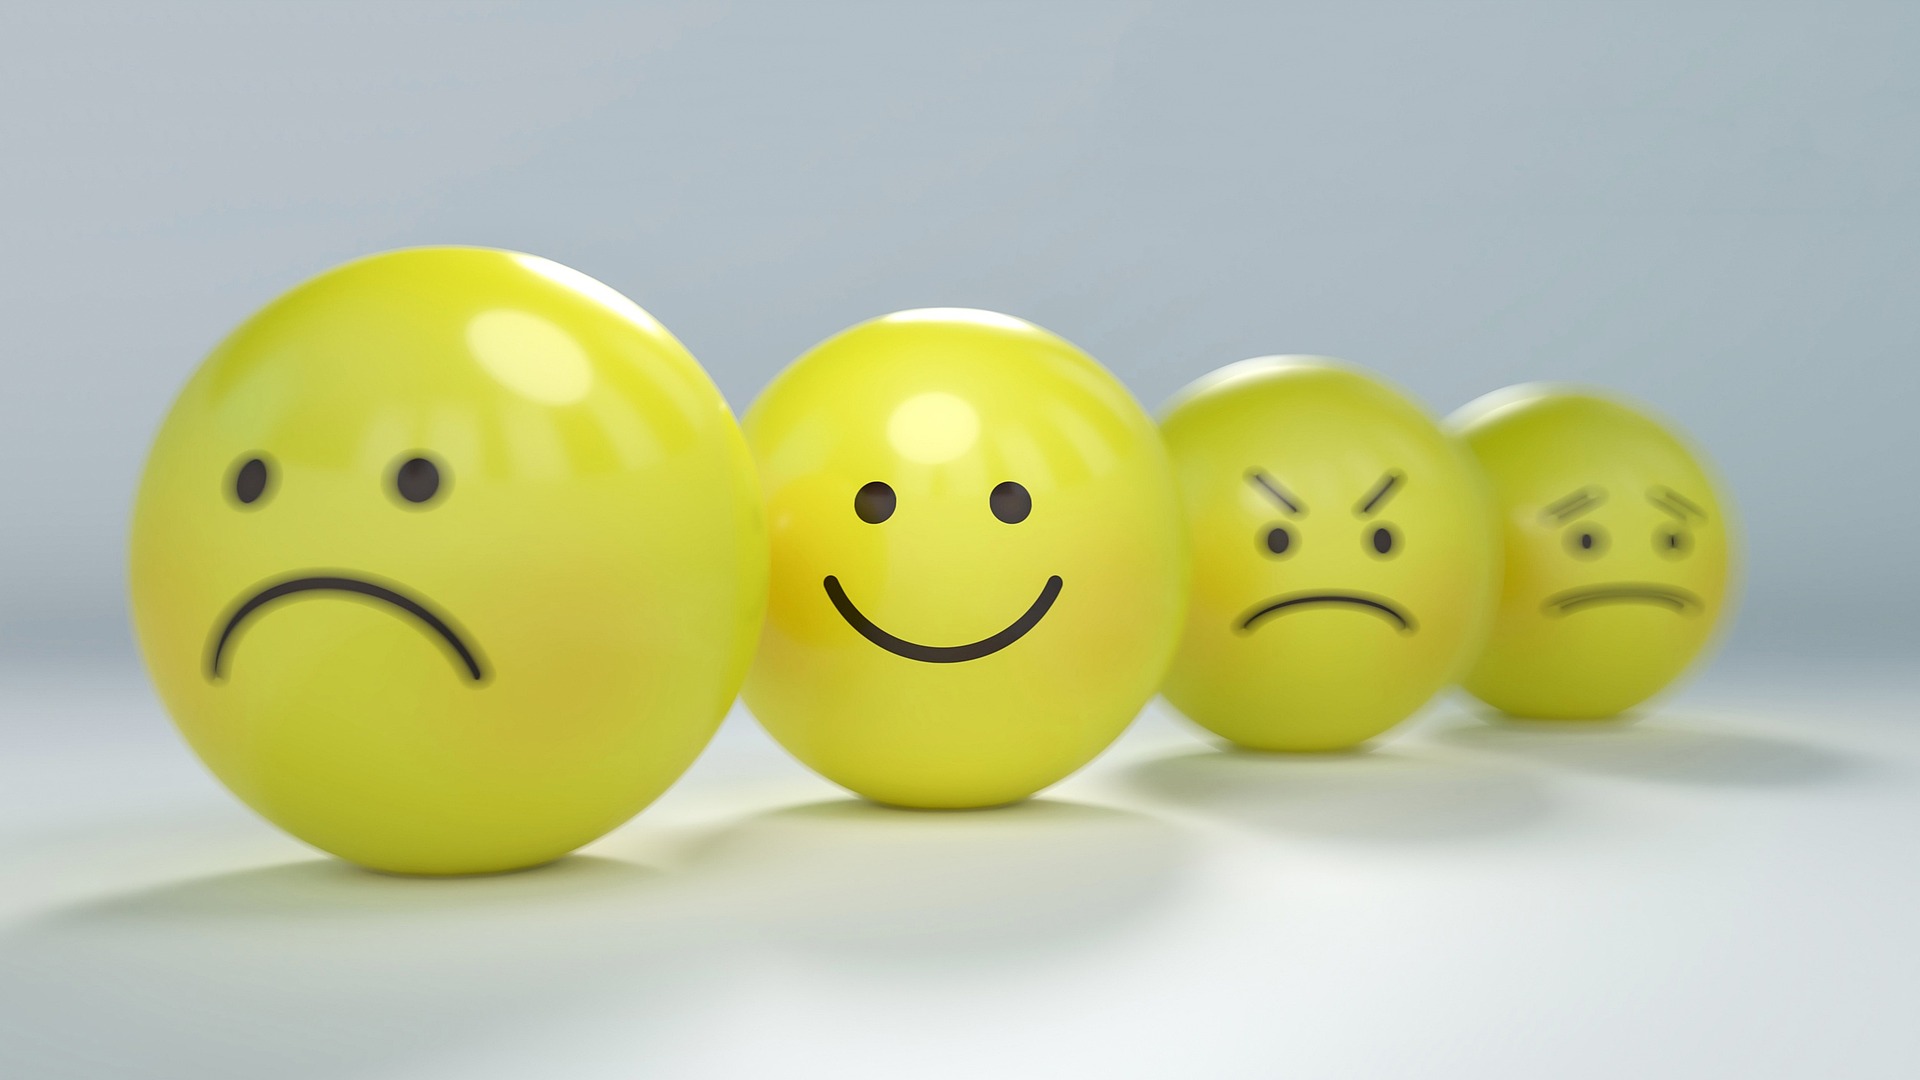 yellow balls with different faces on them